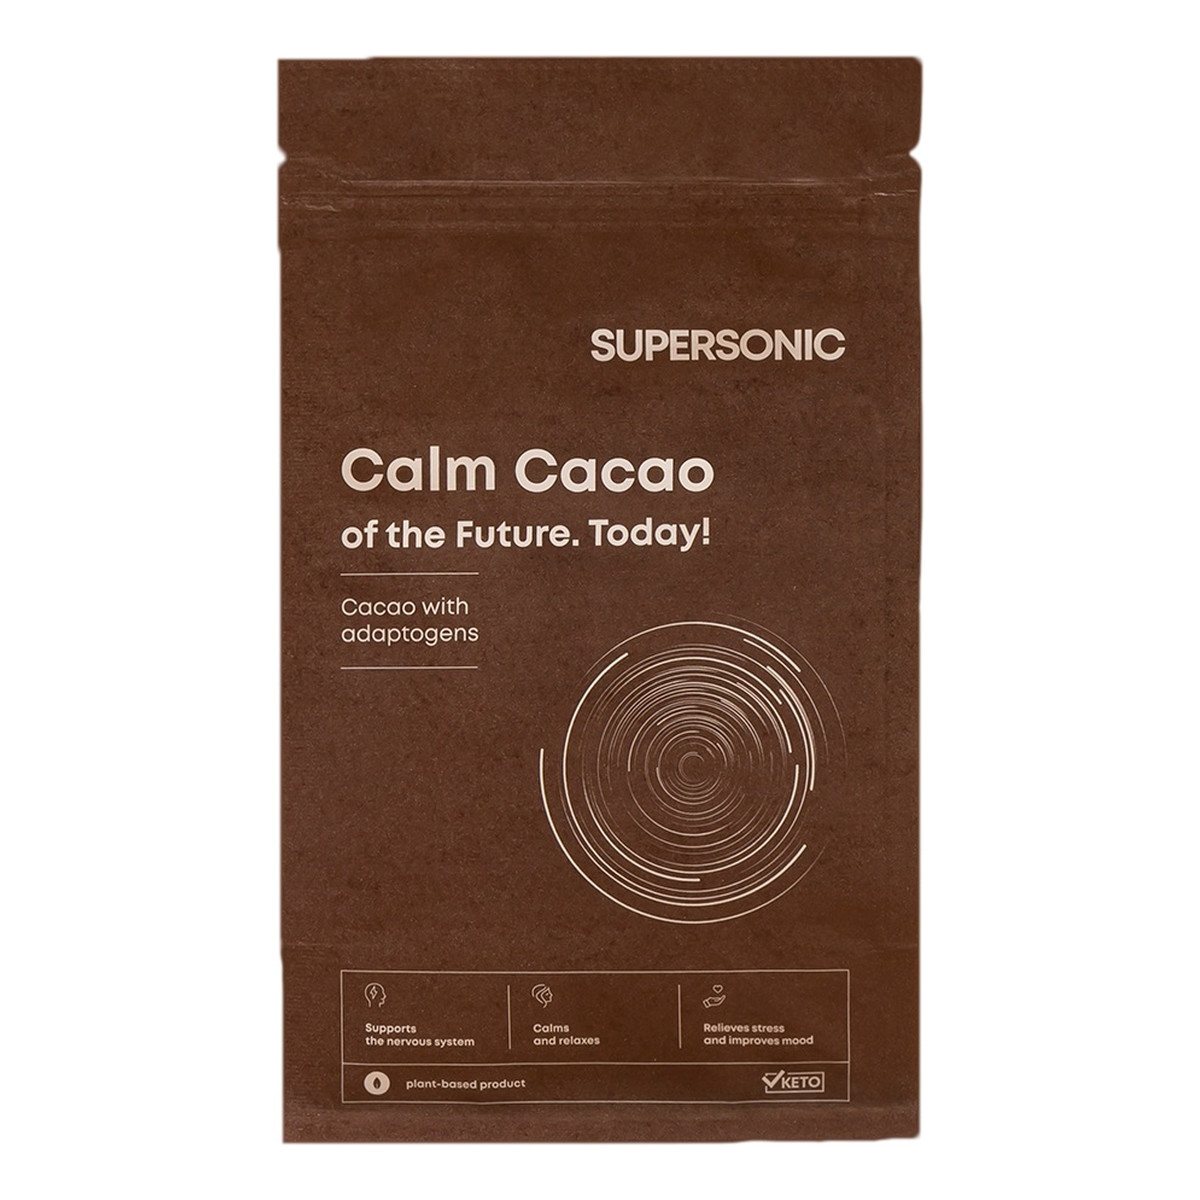 Supersonic Calm cacao kakao z adaptogenami suplement diety 225g